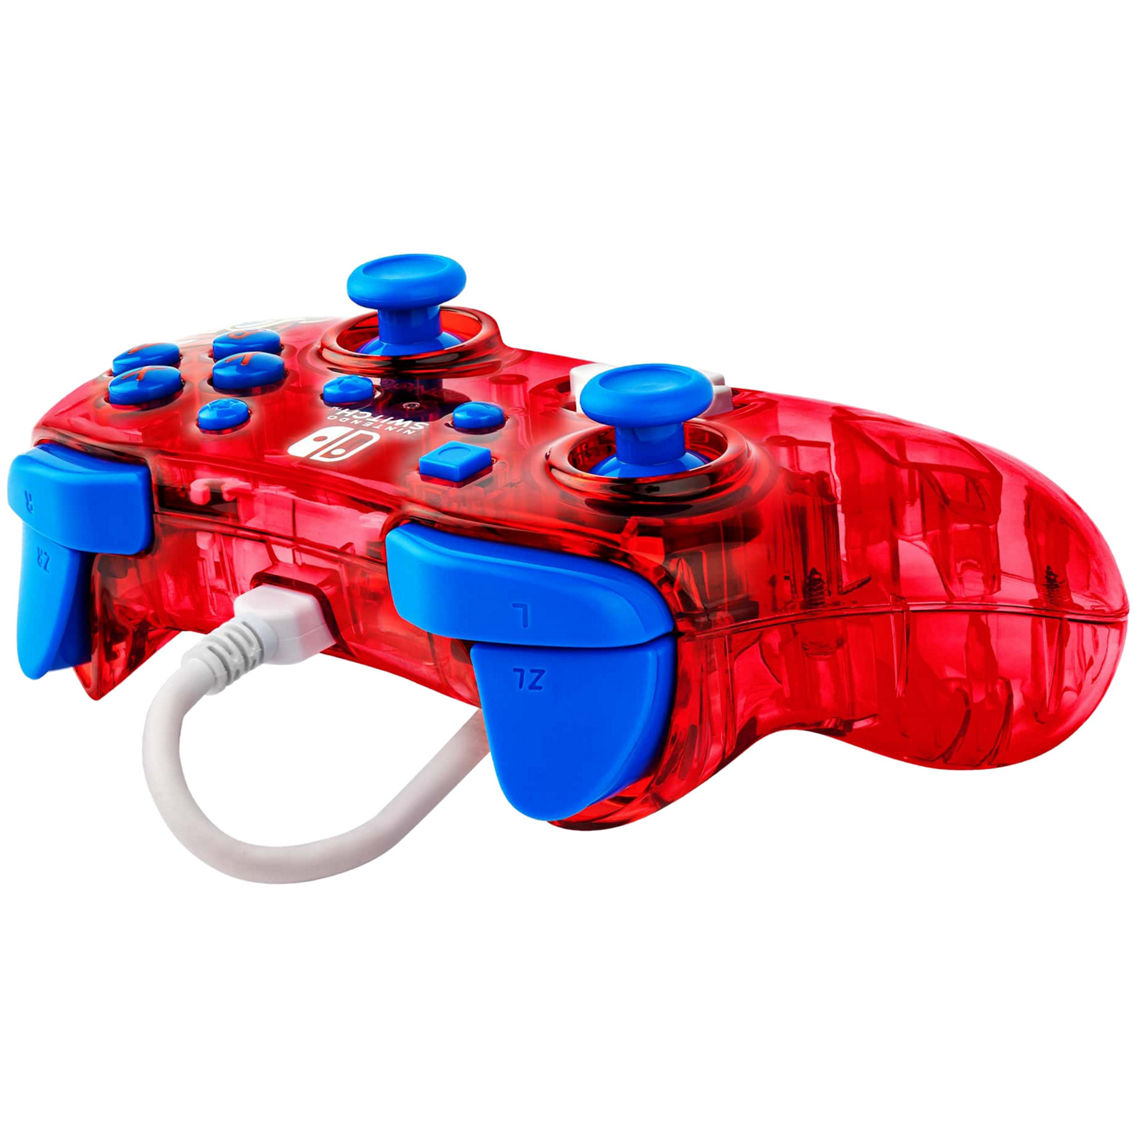 PDP Rock Candy Wired Controller: Mario Punch For Nintendo Switch - Image 6 of 9